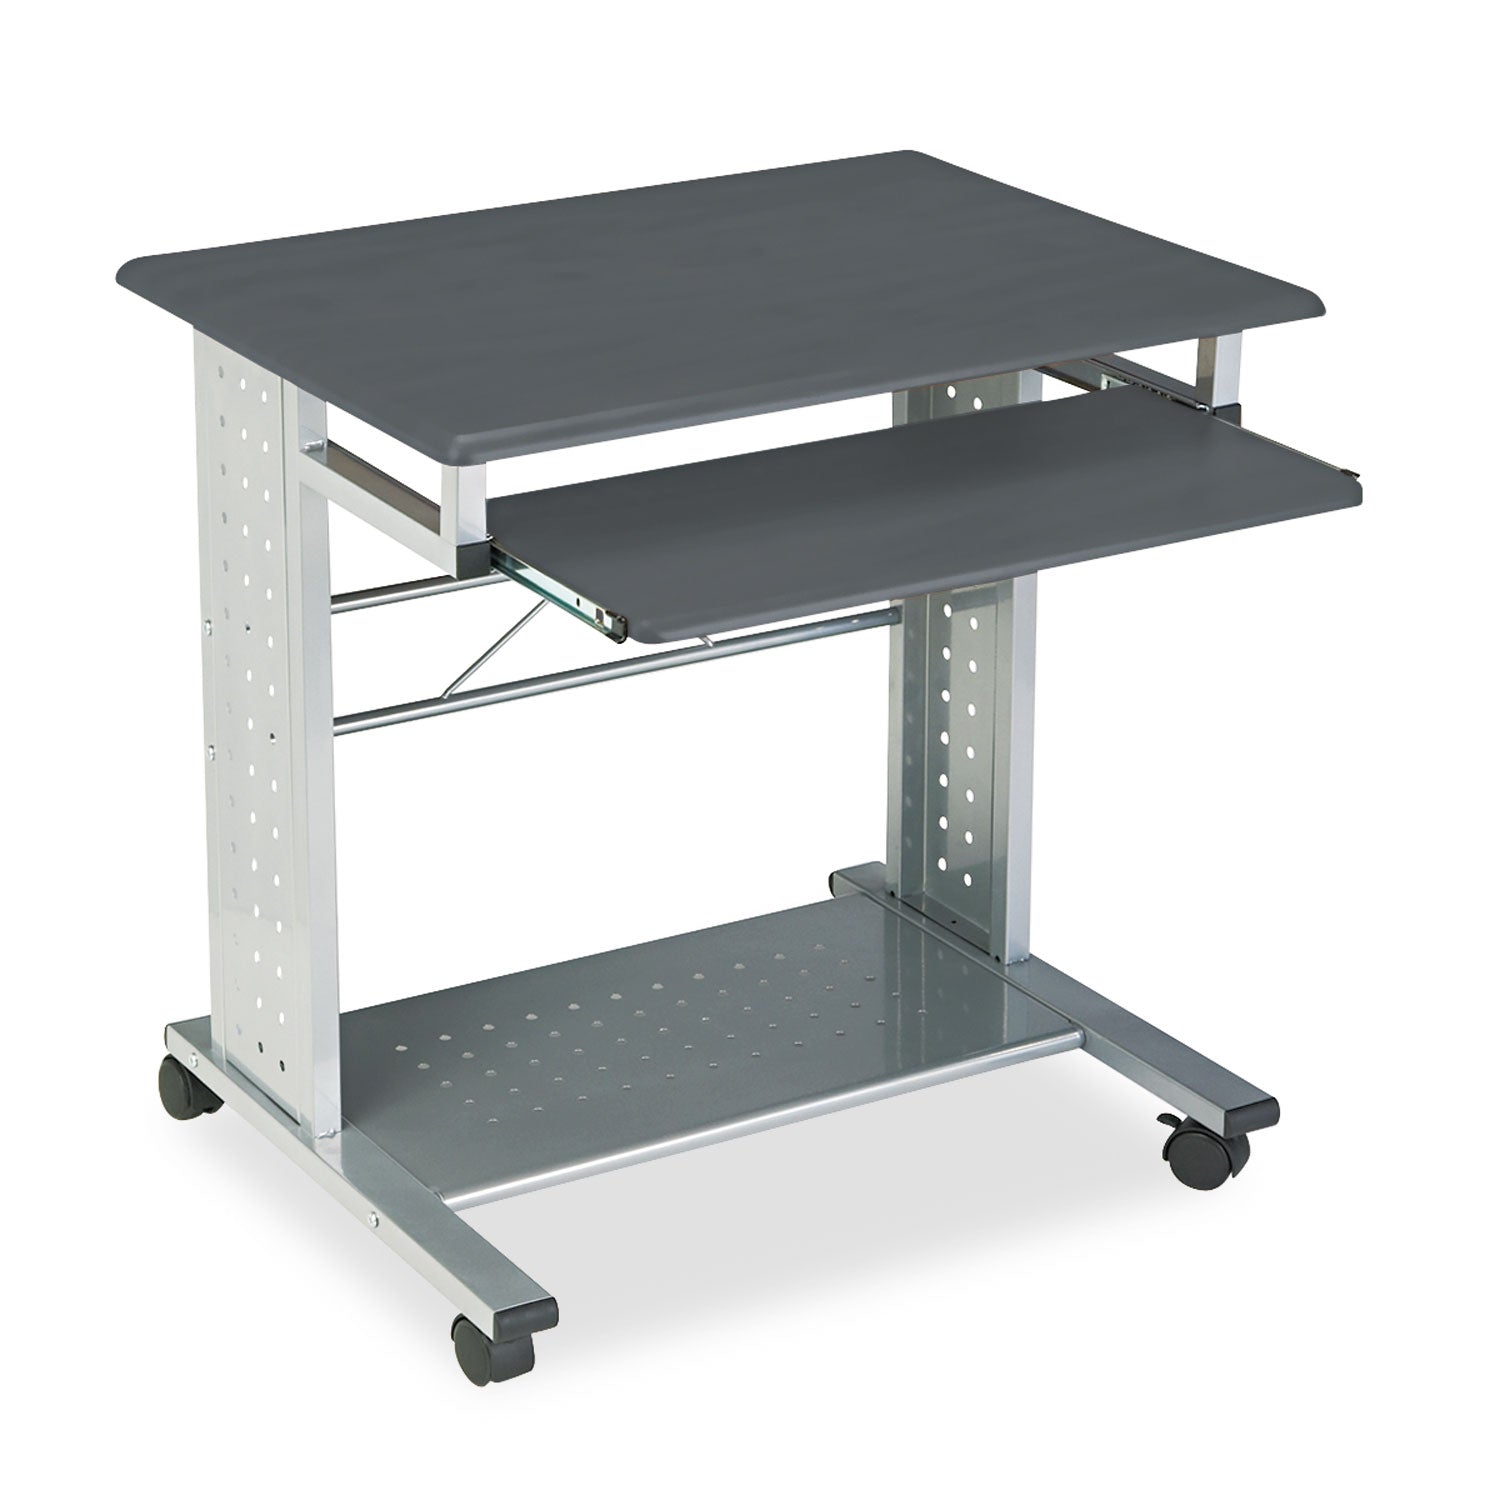 Empire Mobile PC Cart, 29.75" x 23.5" x 29.75", Anthracite/Silver - 